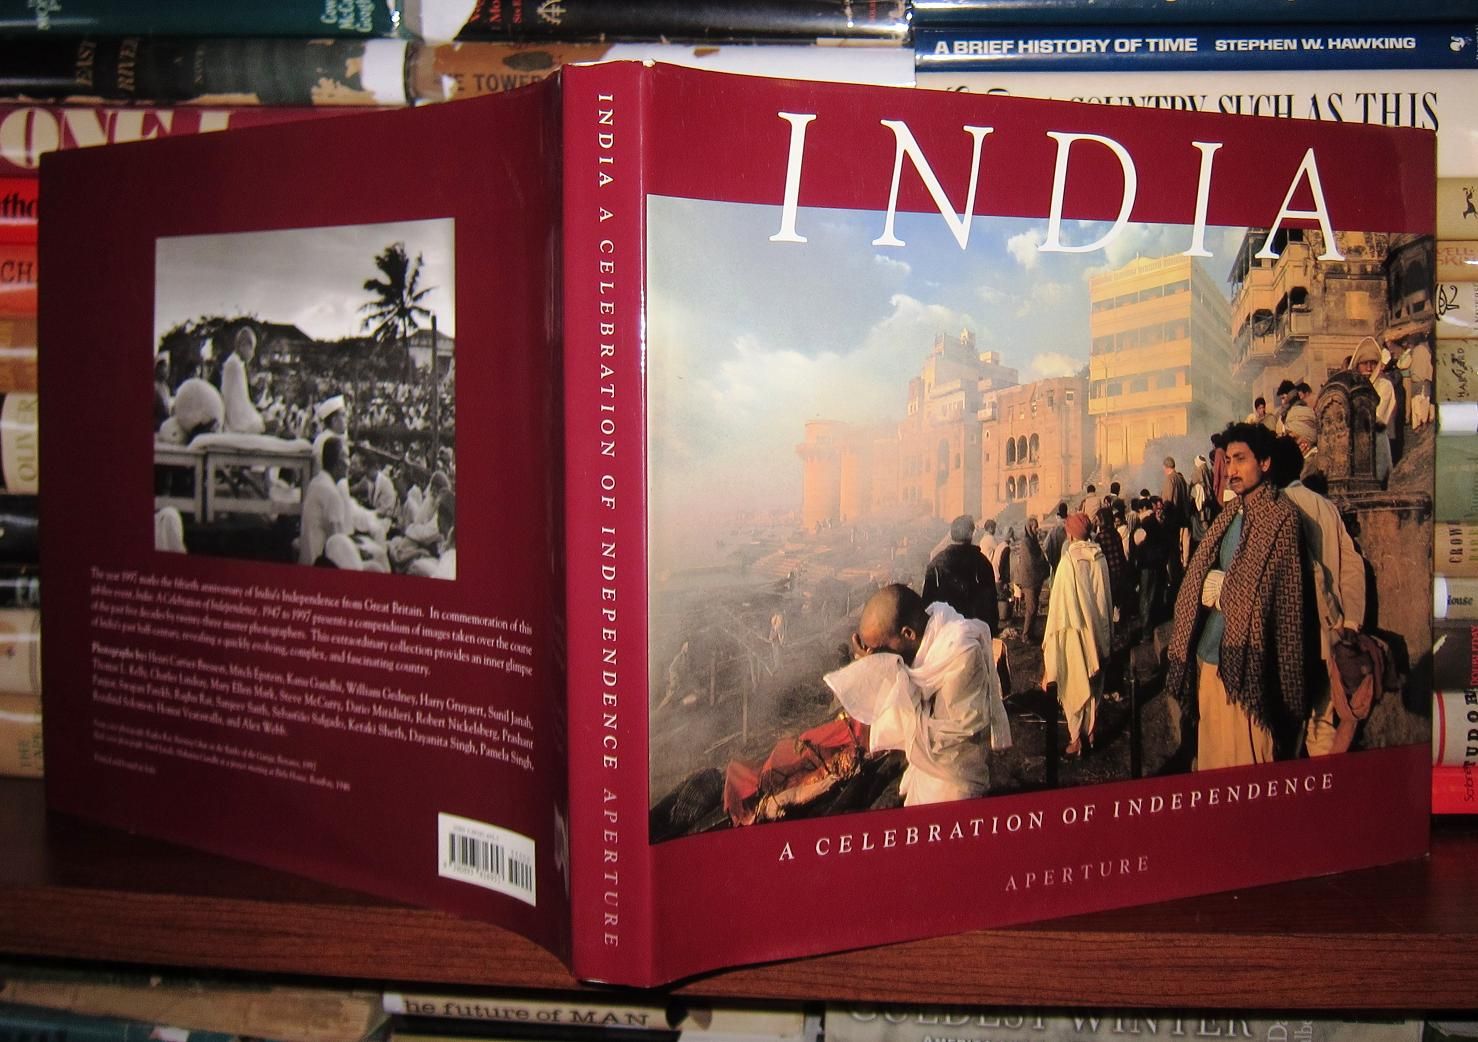 ANANT, VICTOR; D'HARNONCOURT, ANNE & MICHAEL J. HOFFMAN - India a Celebration of Independence, 1947 to 1997